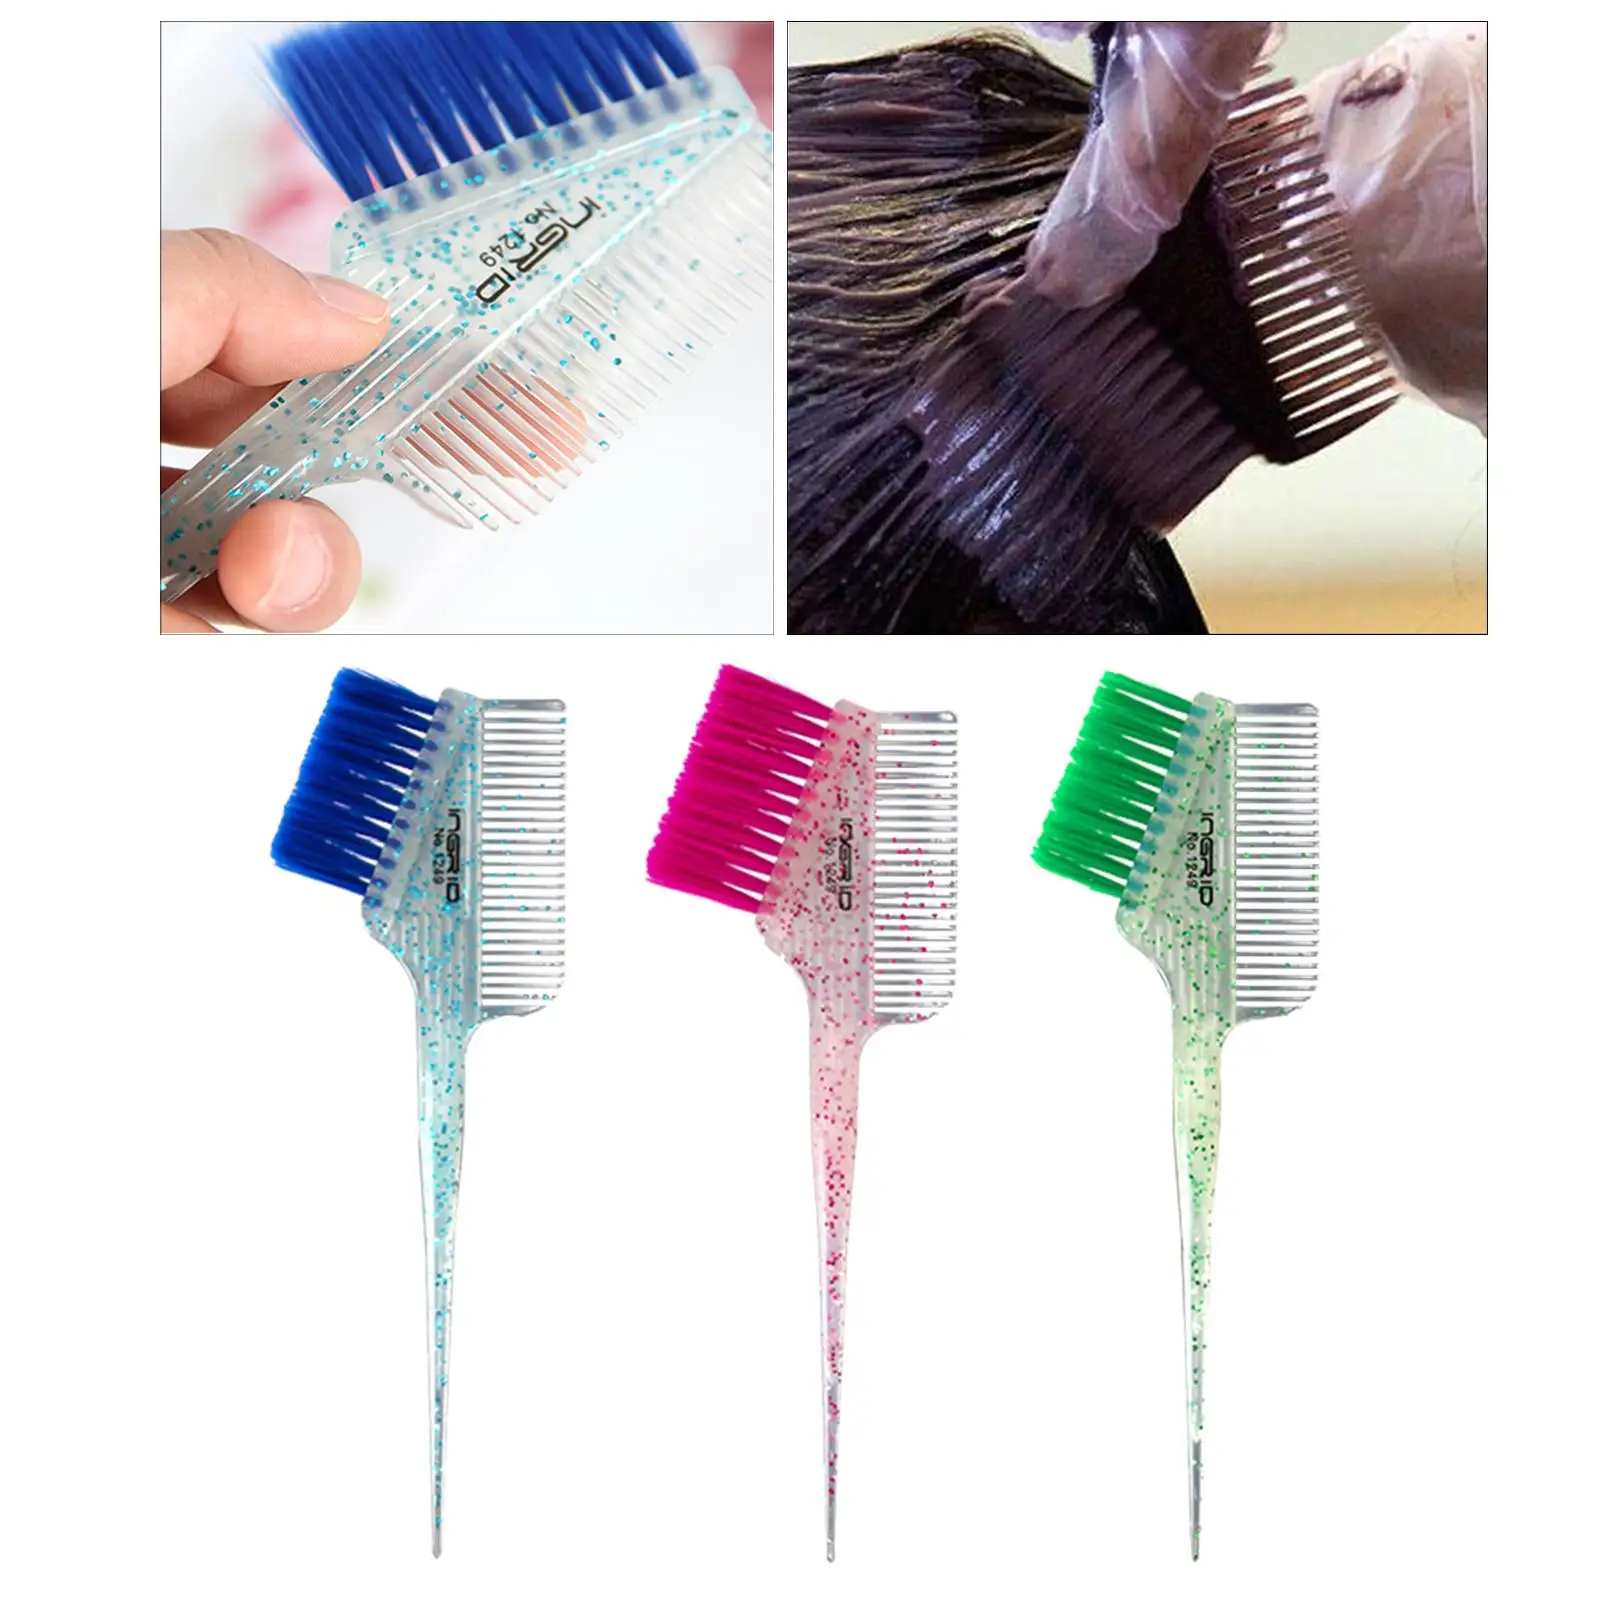 3x Pearl Hair Dye Brushes Comb Styling Tools for Dyeing for Salon